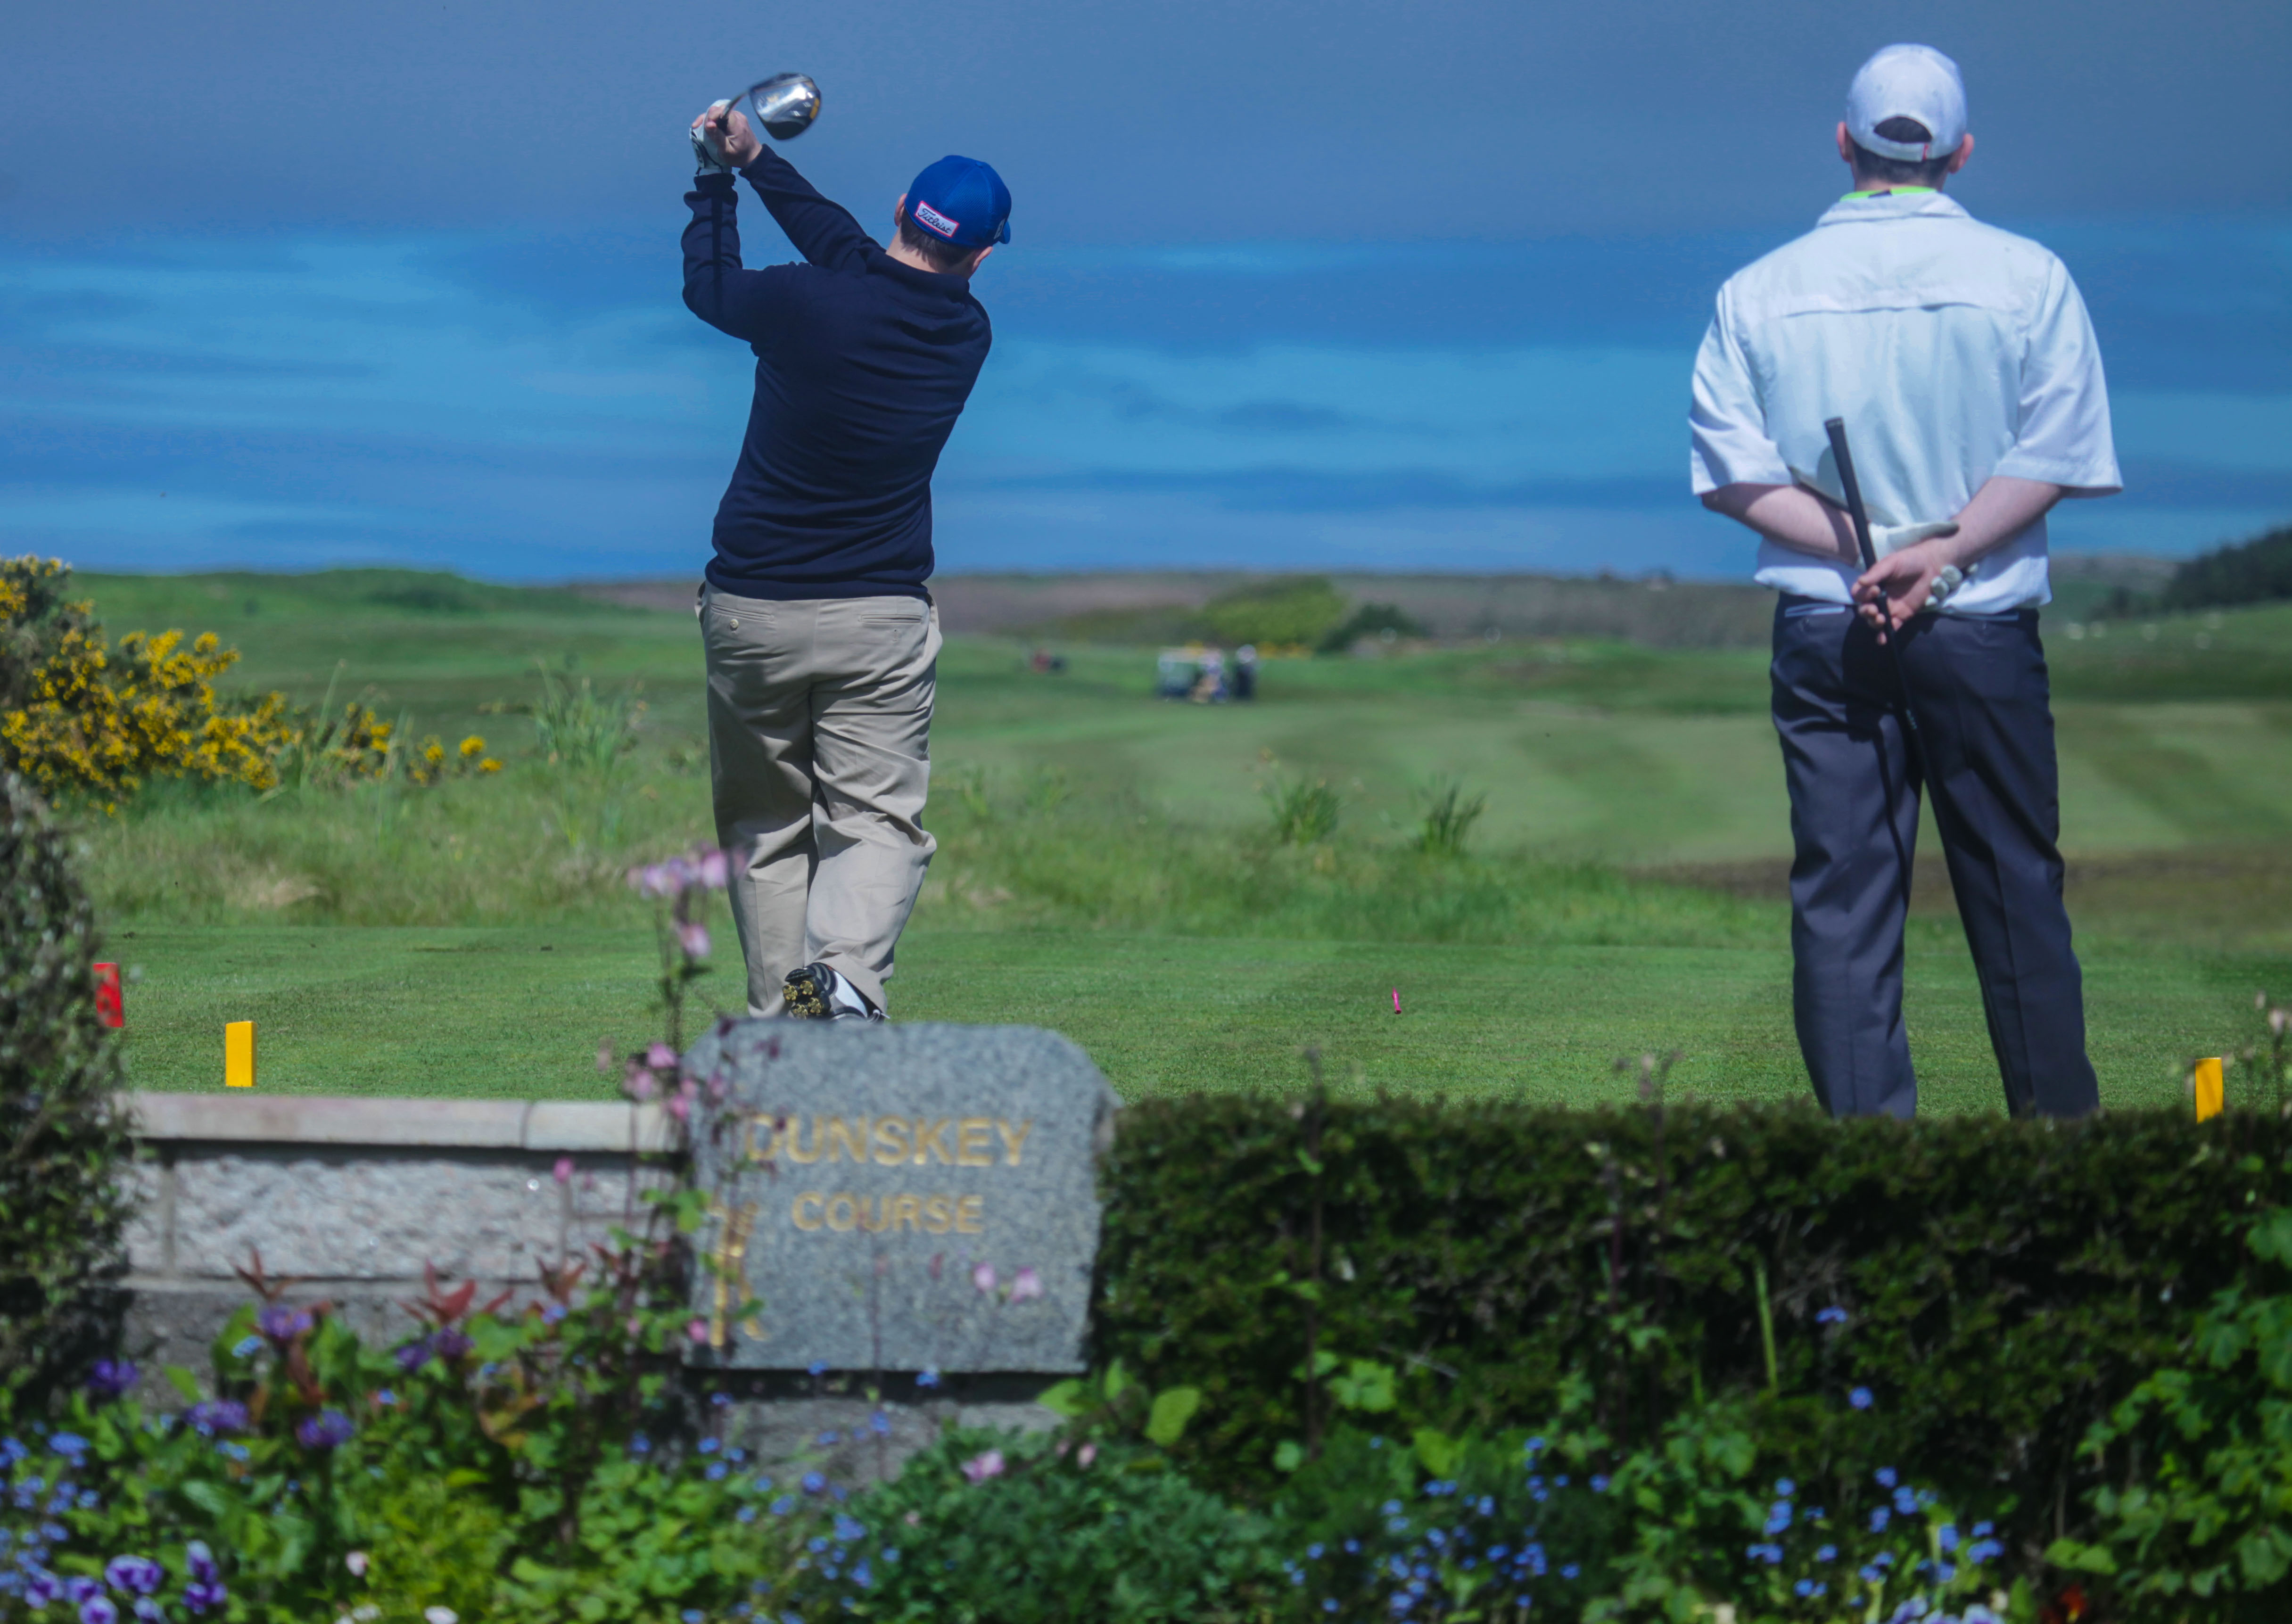 A round at the Portpatrick Dunskey Golf Course